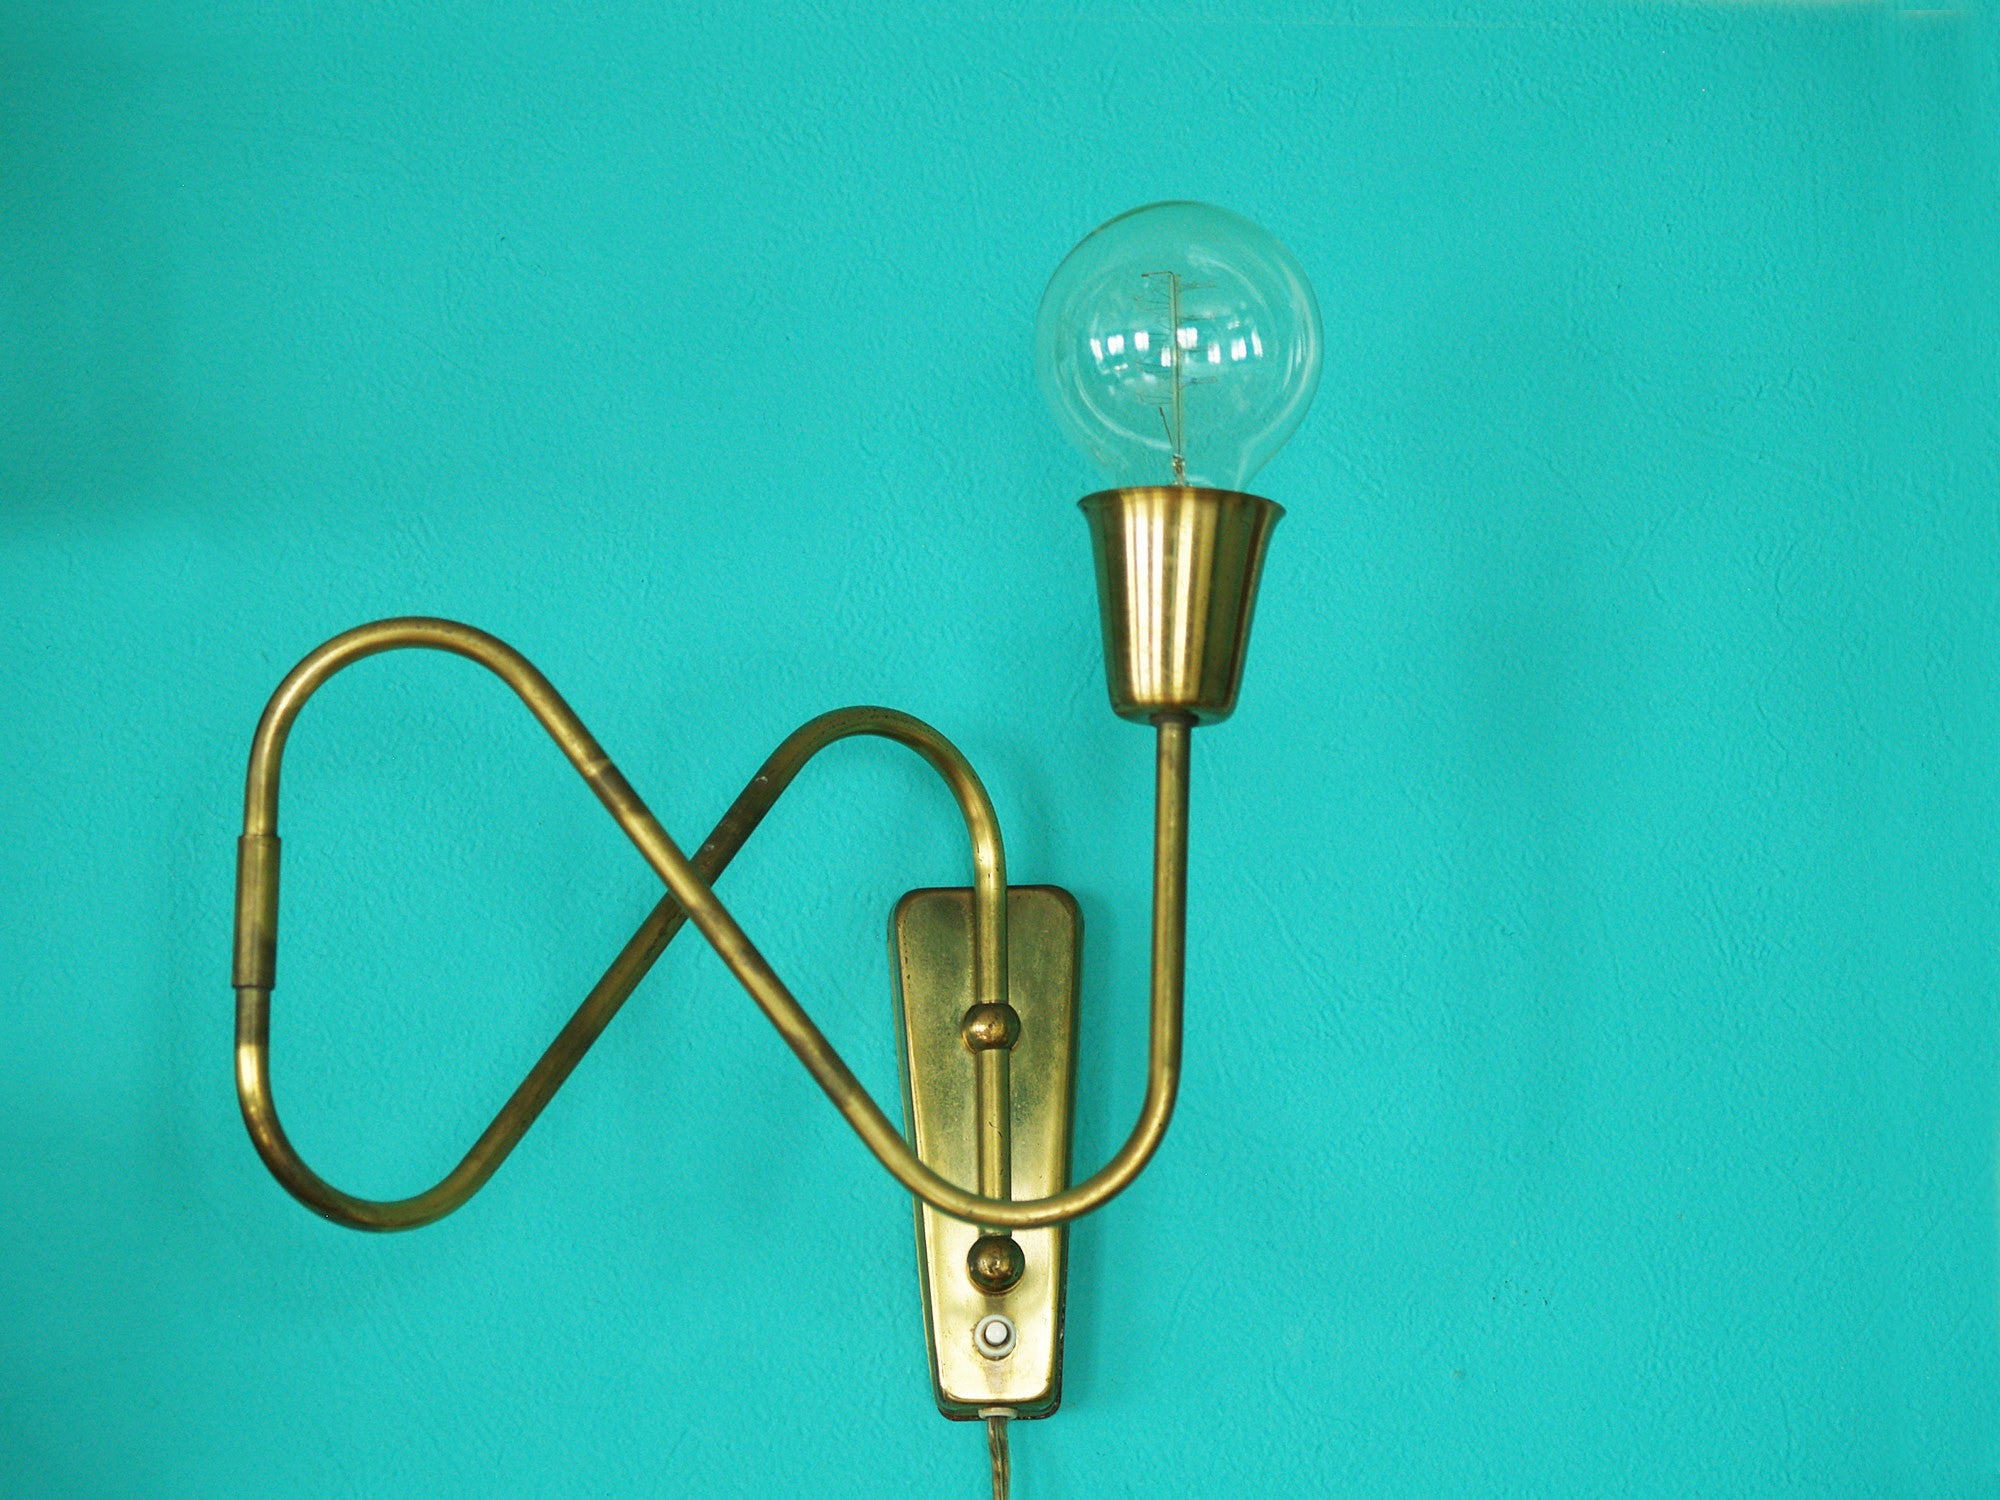 Paire d’appliques / potences de Bent Karlby pour Lyfa, Danemark (vers 1950)..Pair of swing arm wall light by Bent Karlby for Lyfa, Denmark (circa 1950)